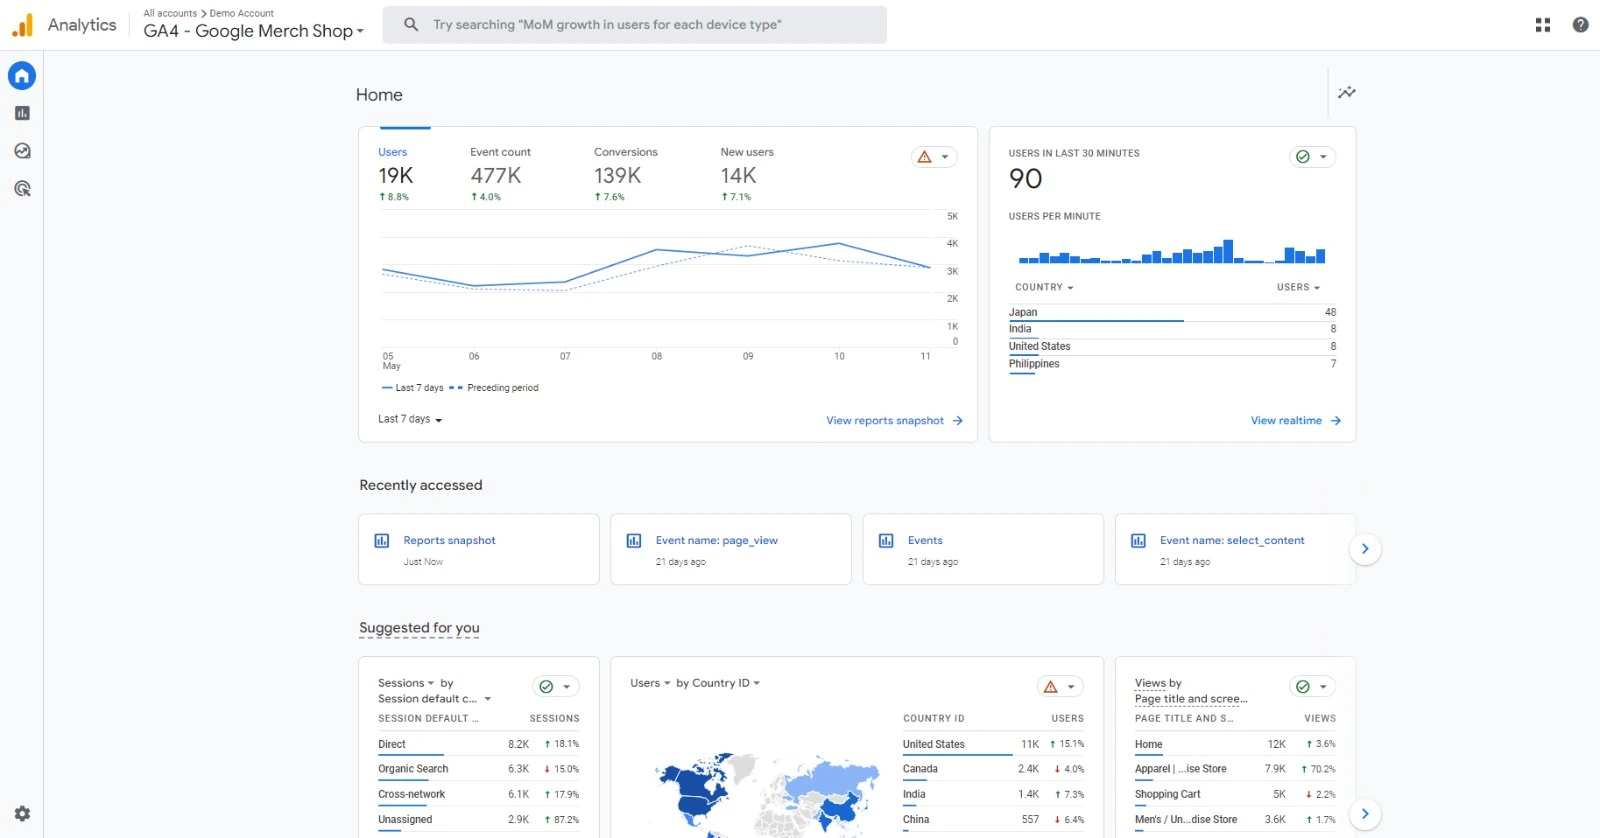 A screenshot of the Google Analytics dashboard displaying website traffic information, including the number of users, sessions, and pageviews.